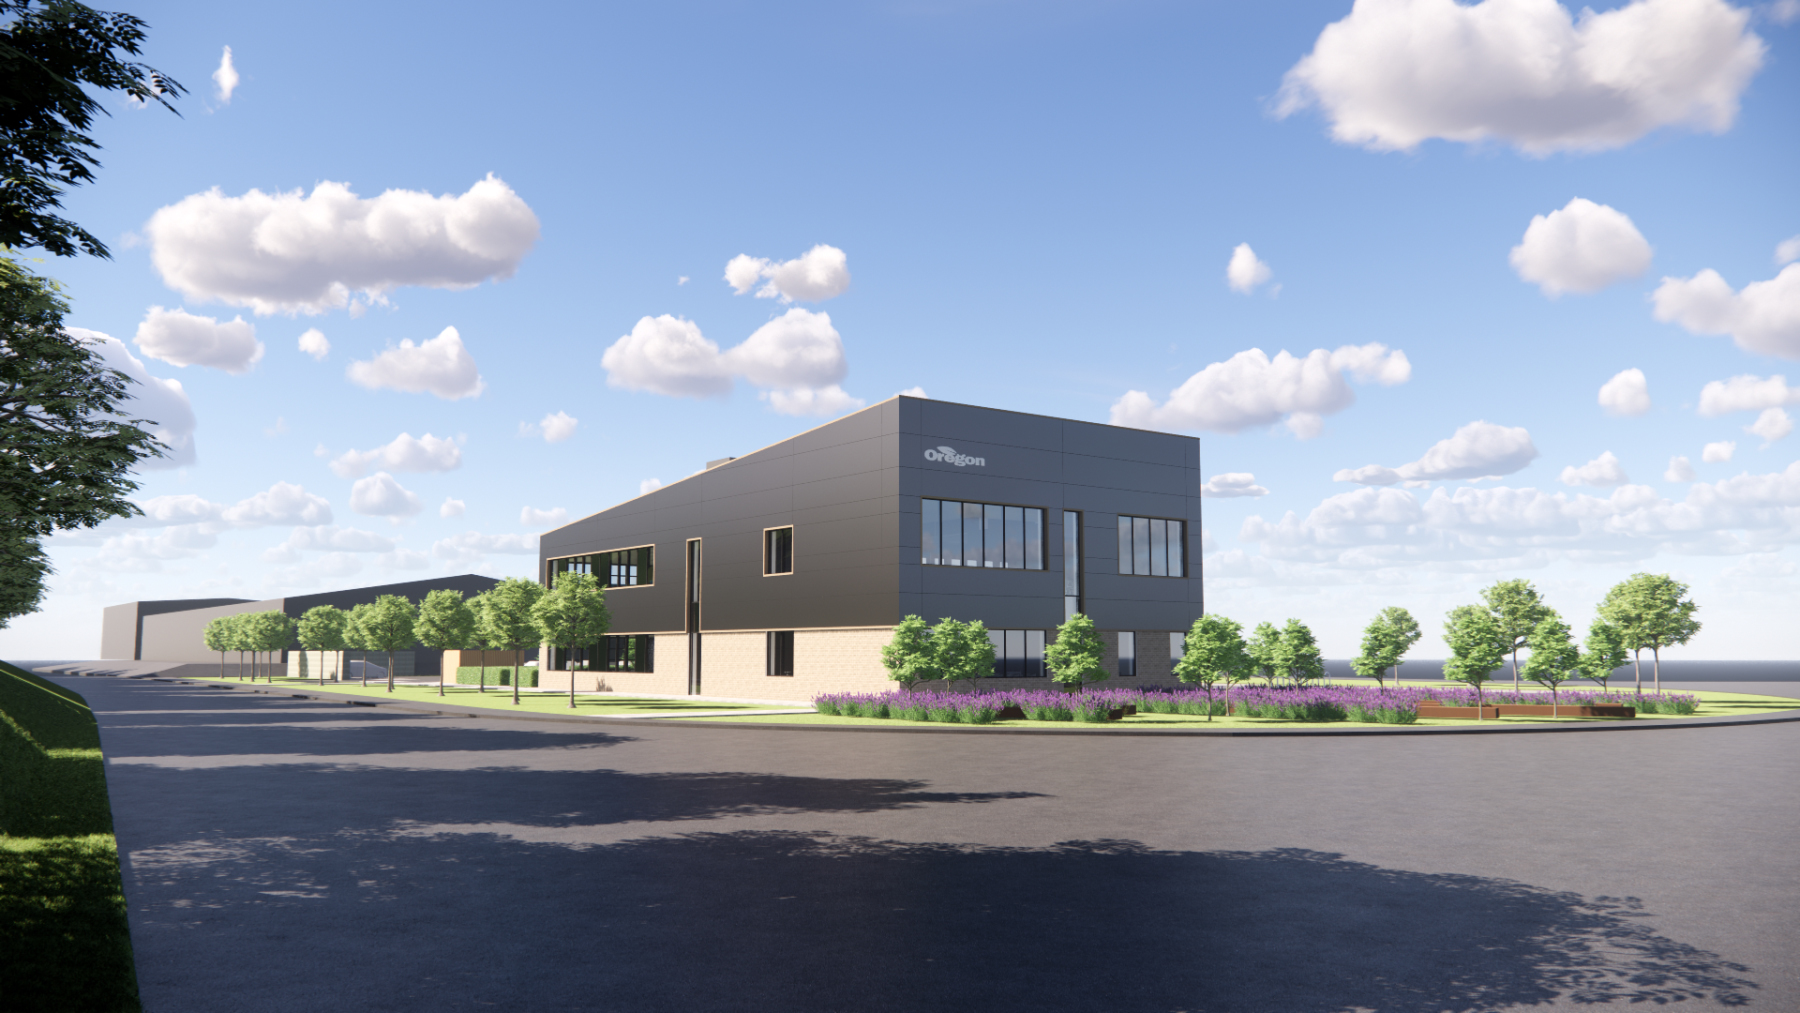 Barratt Developments begins first phase of expansion at Oregon site